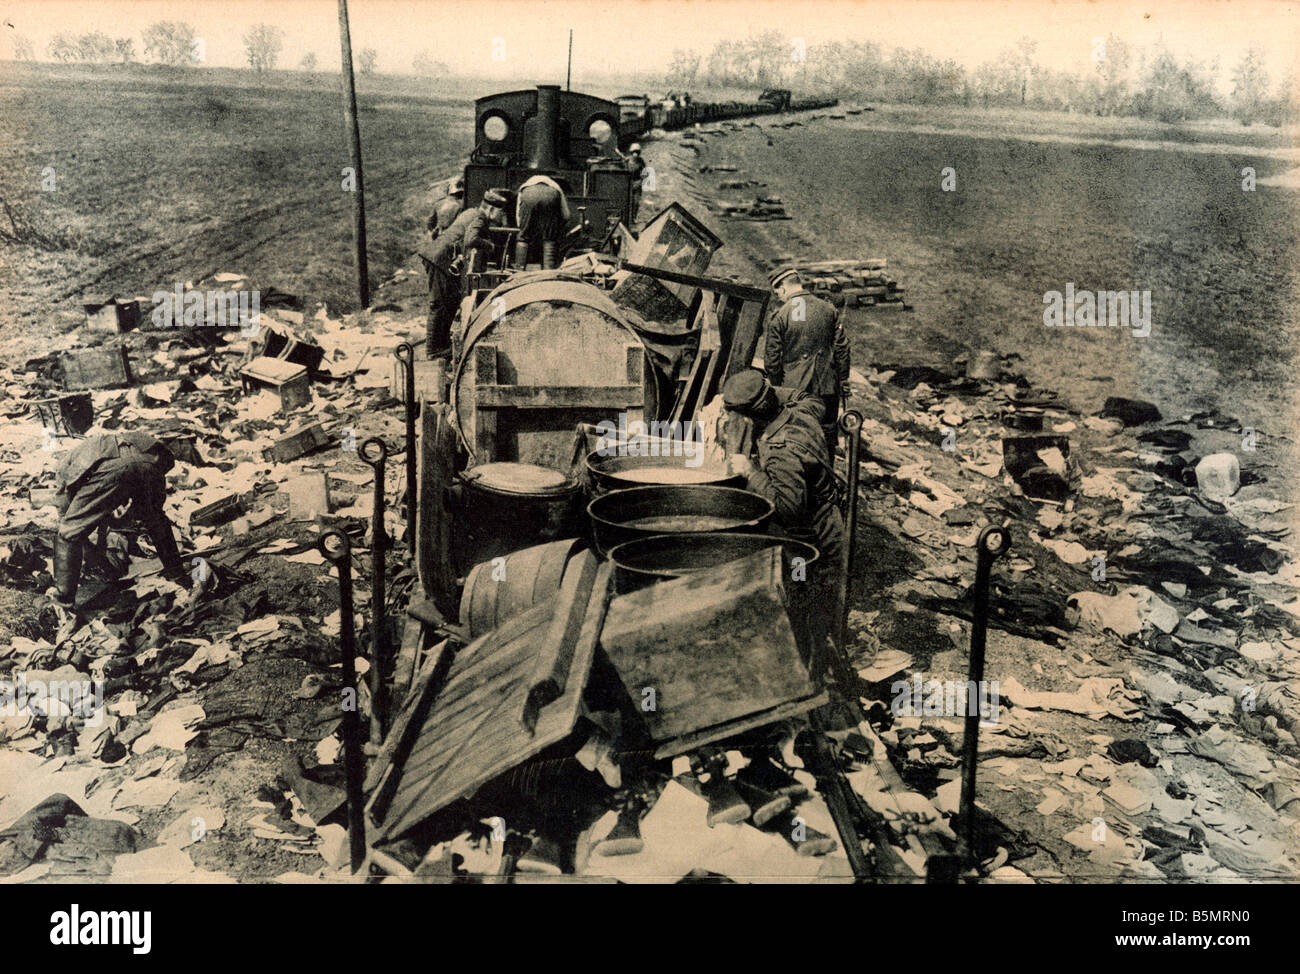 9 1918 4 9 A1 2 E Battle of Armentieres Eng lght train World War 1 1914 18 Westernf Front Battle of Armentieres Arr Lille 9th 18 Stock Photo